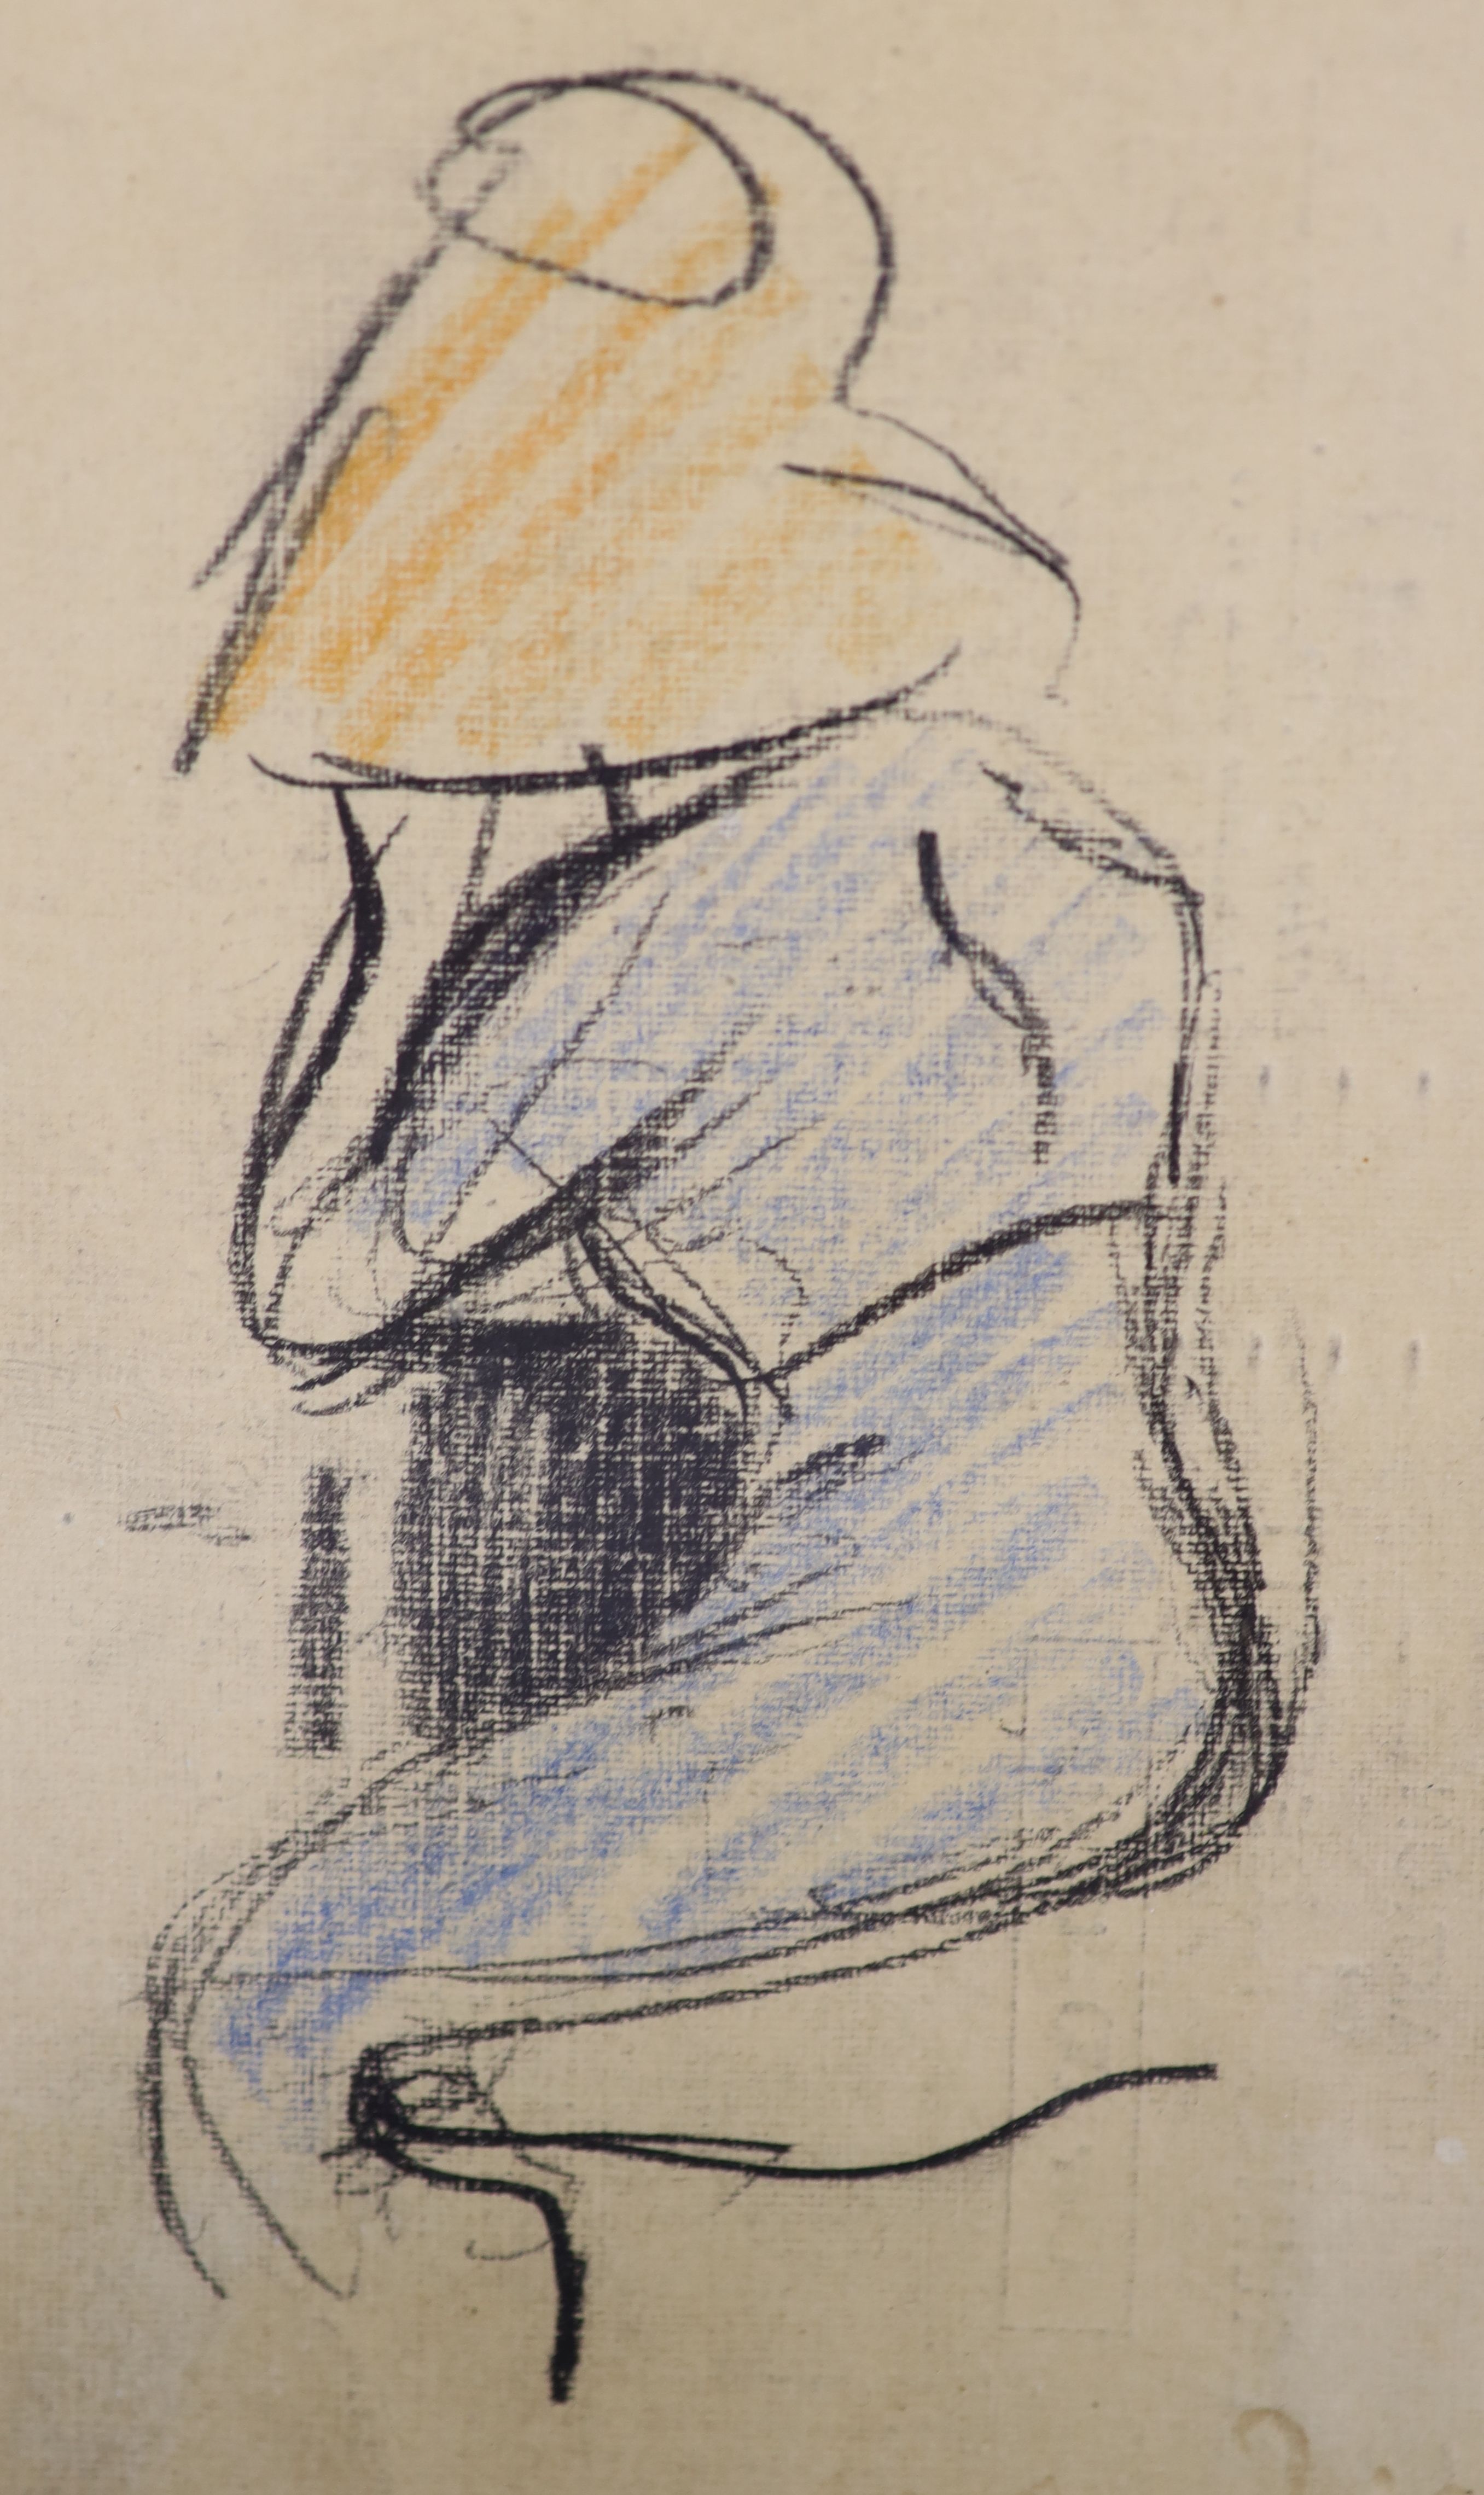 C. Gill?, coloured chalk on paper, Study of a woman wearing an orange hat, 16 x 10cm